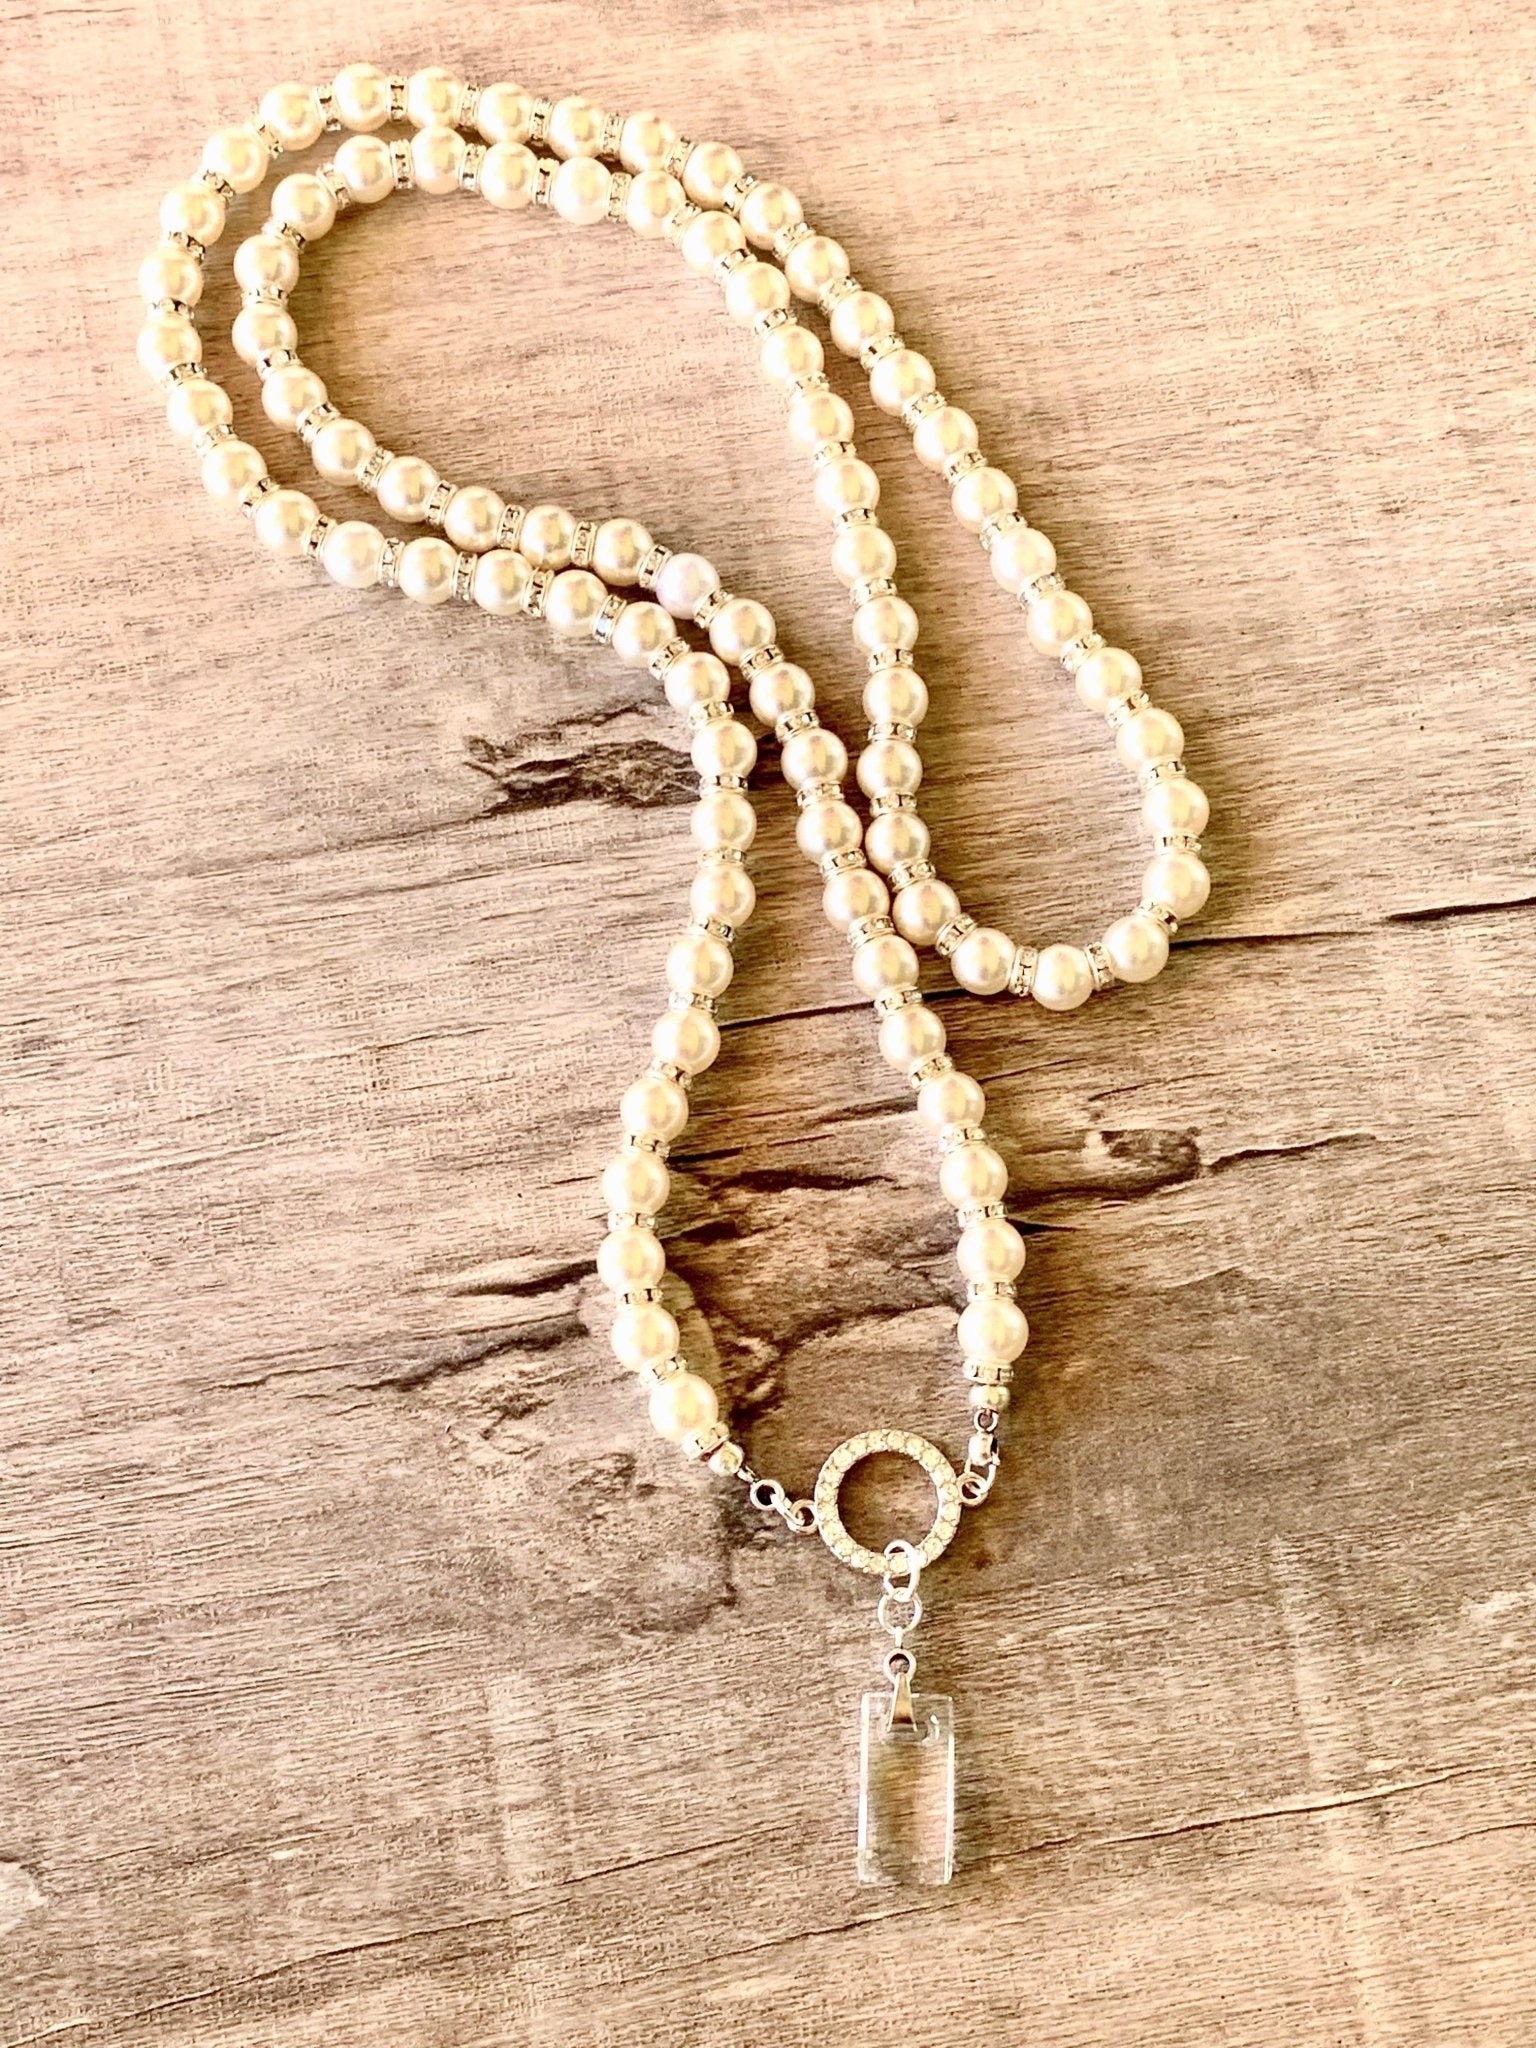 🔴SOLD🔴 Laura Handmade Faux Pearl 31" Necklace with Swarovski Elements Crystal Pendant - Born Mystics